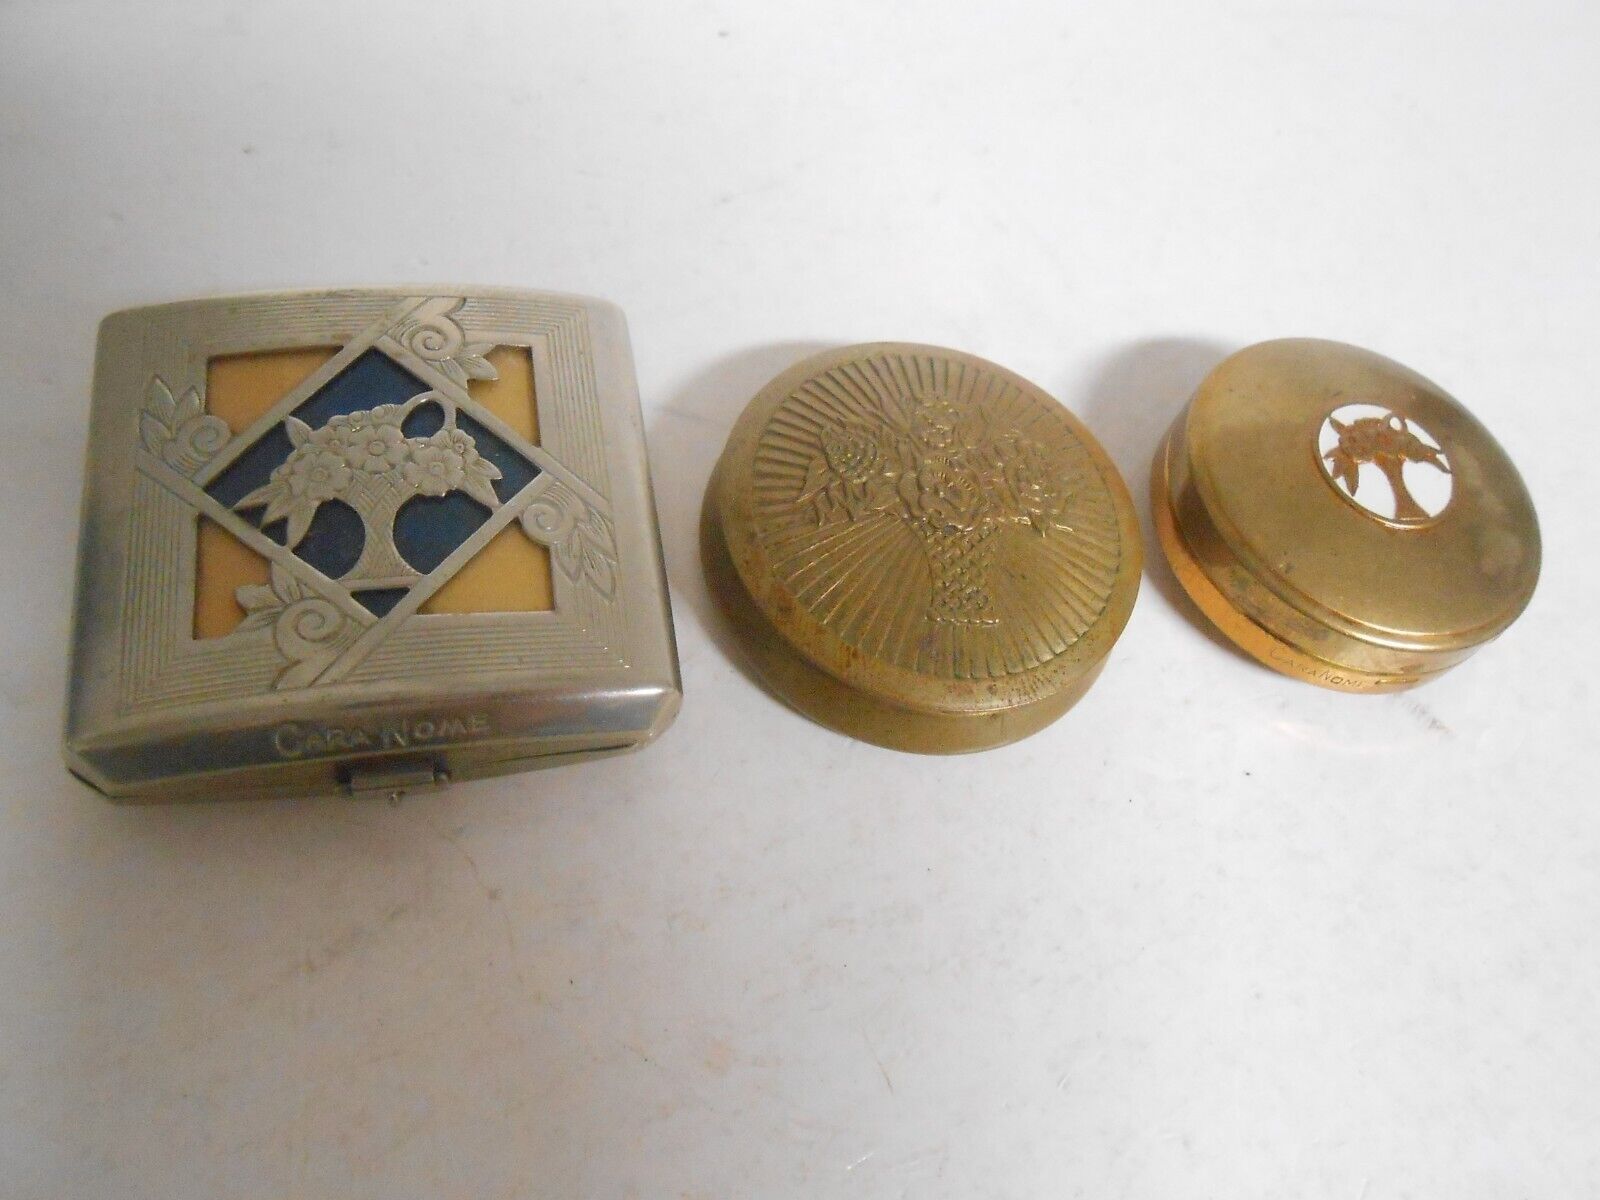 VINTAGE CARA NOME LANGLOIS NEW YORK ROUGE  BOX COMPACT WITH MIRROR LOT OF 3